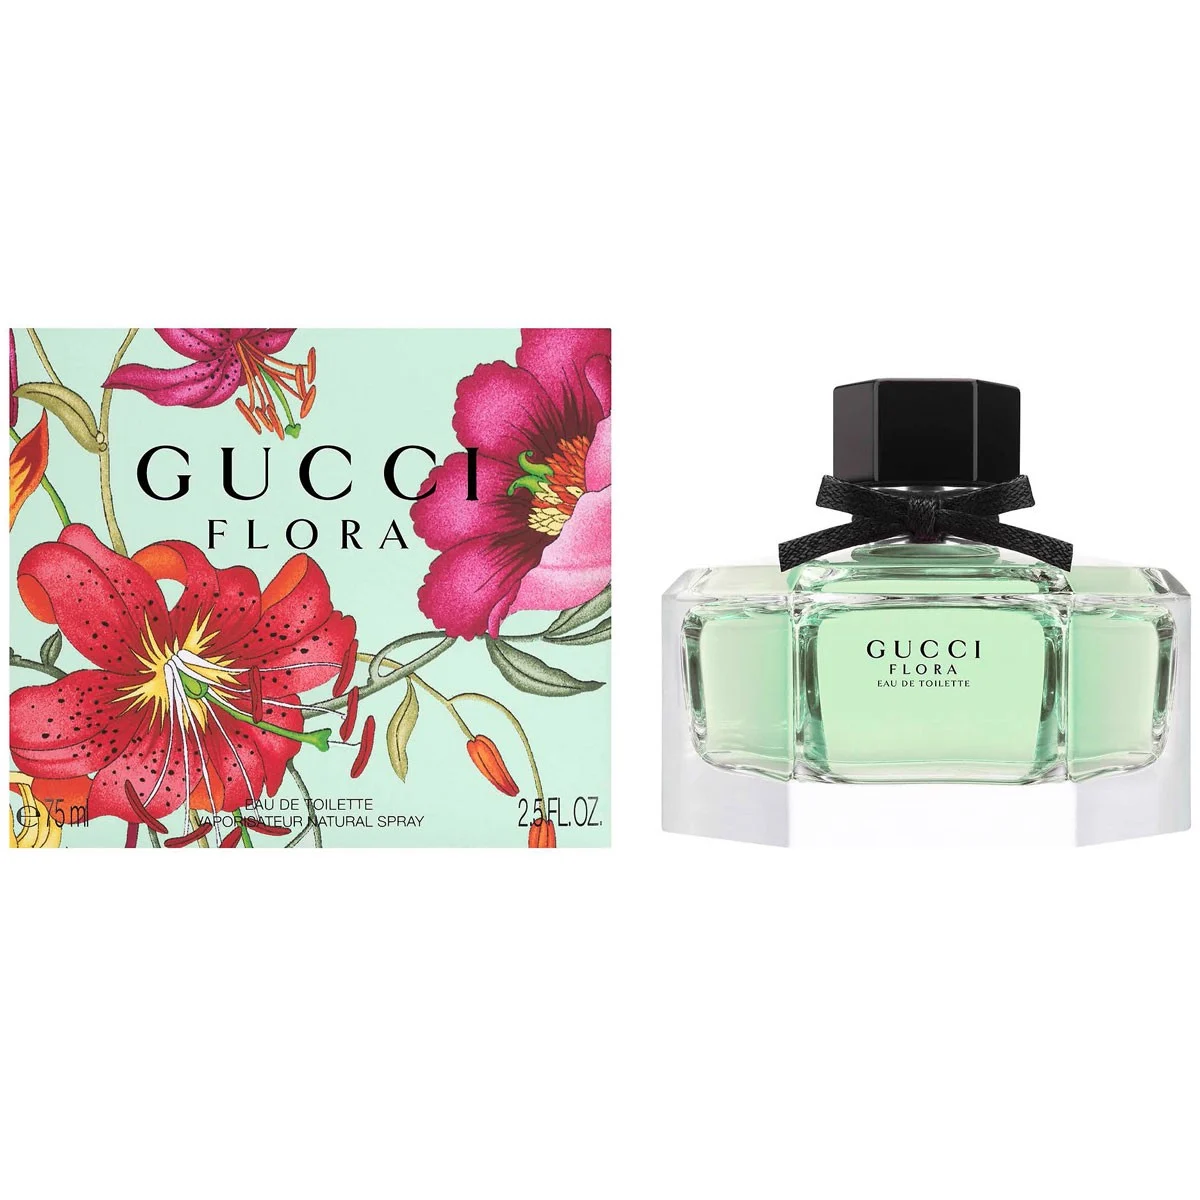 GUCCI FLORA EDT FOR WOMEN